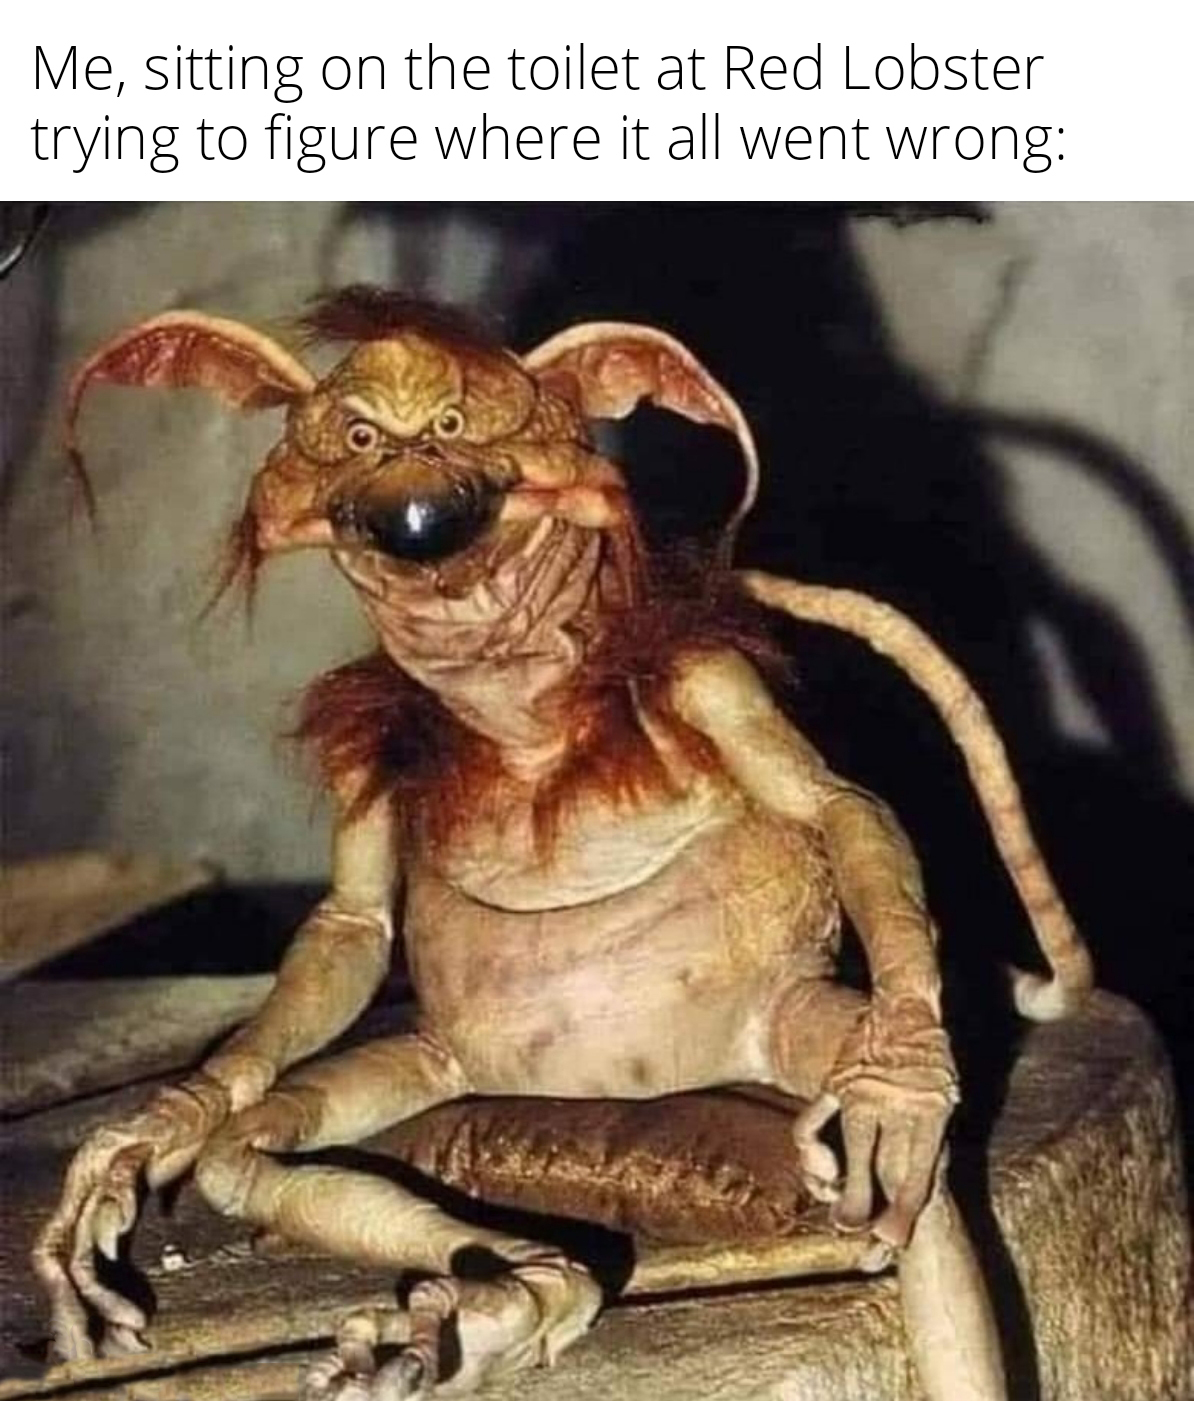 salacious crumb - Me, sitting on the toilet at Red Lobster trying to figure where it all went wrong